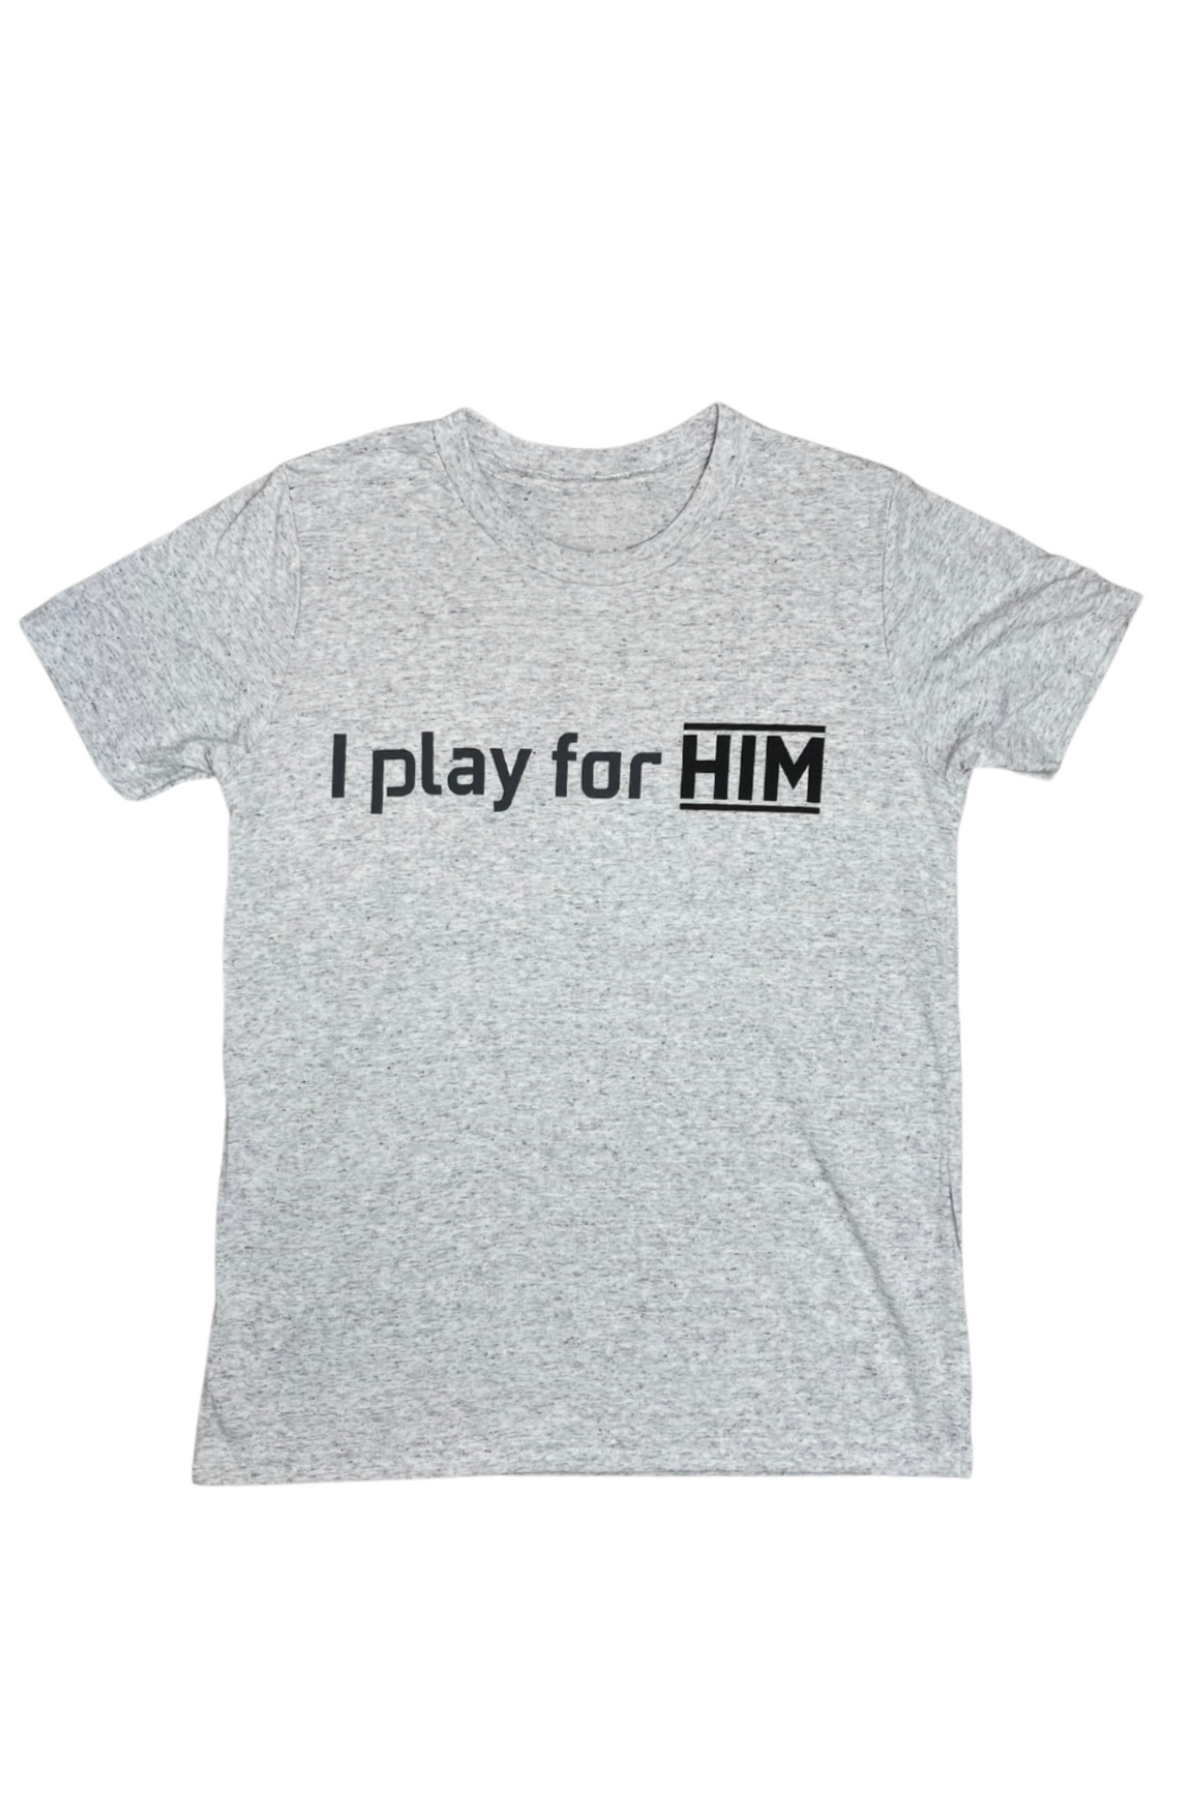 I play for Him Humility Series Short Sleeve